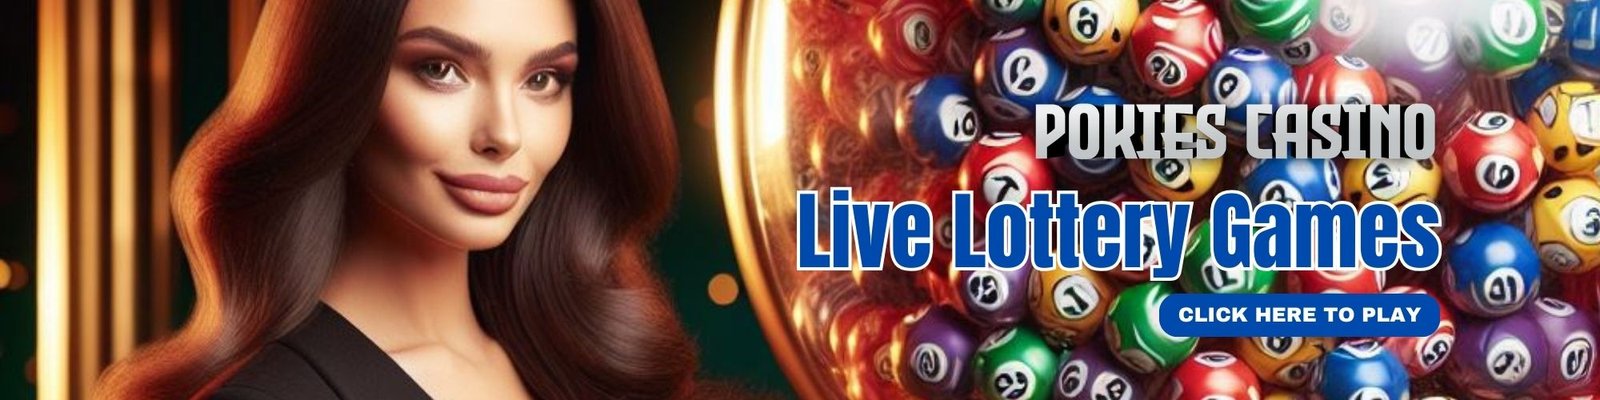 Live Lottery Games